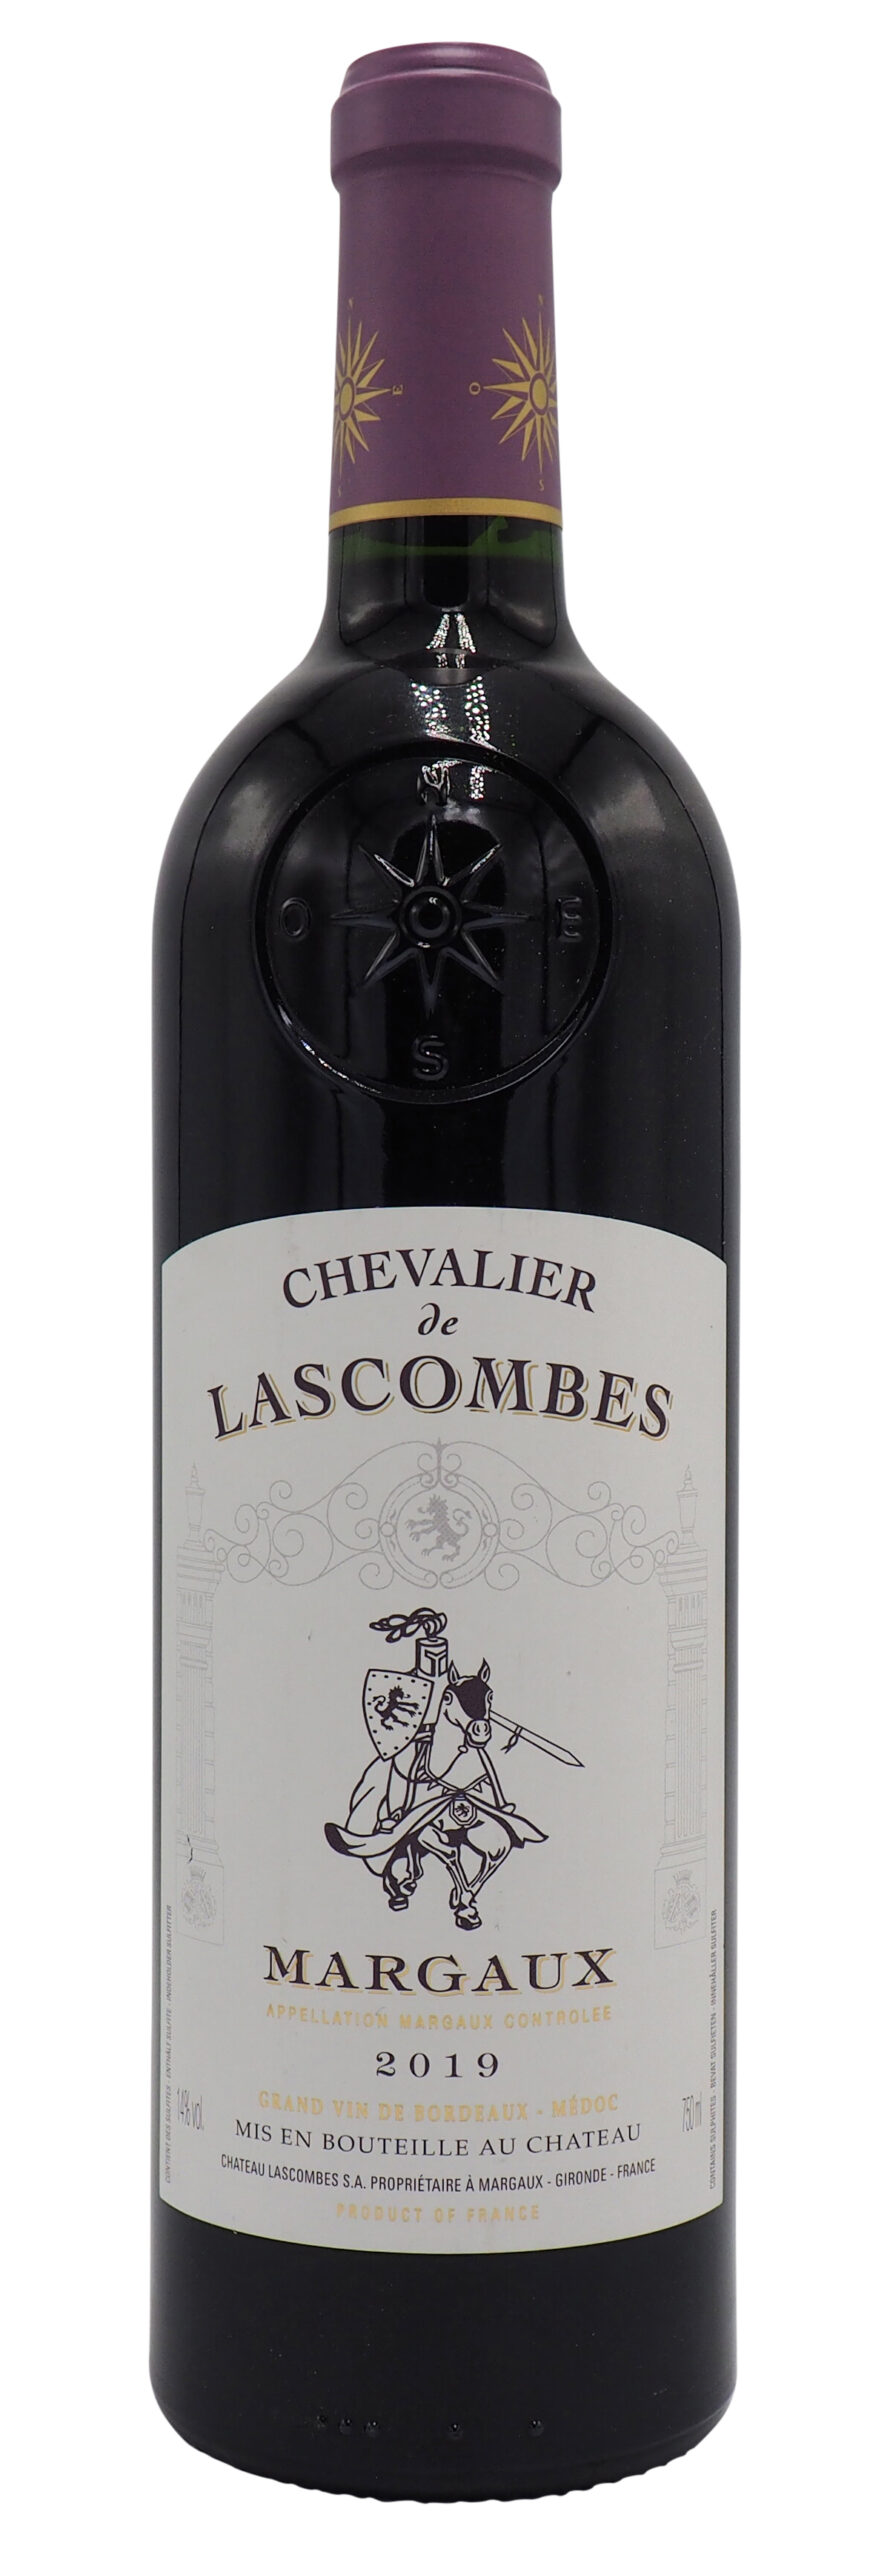 Lascombes Chevalier Margaux 2019